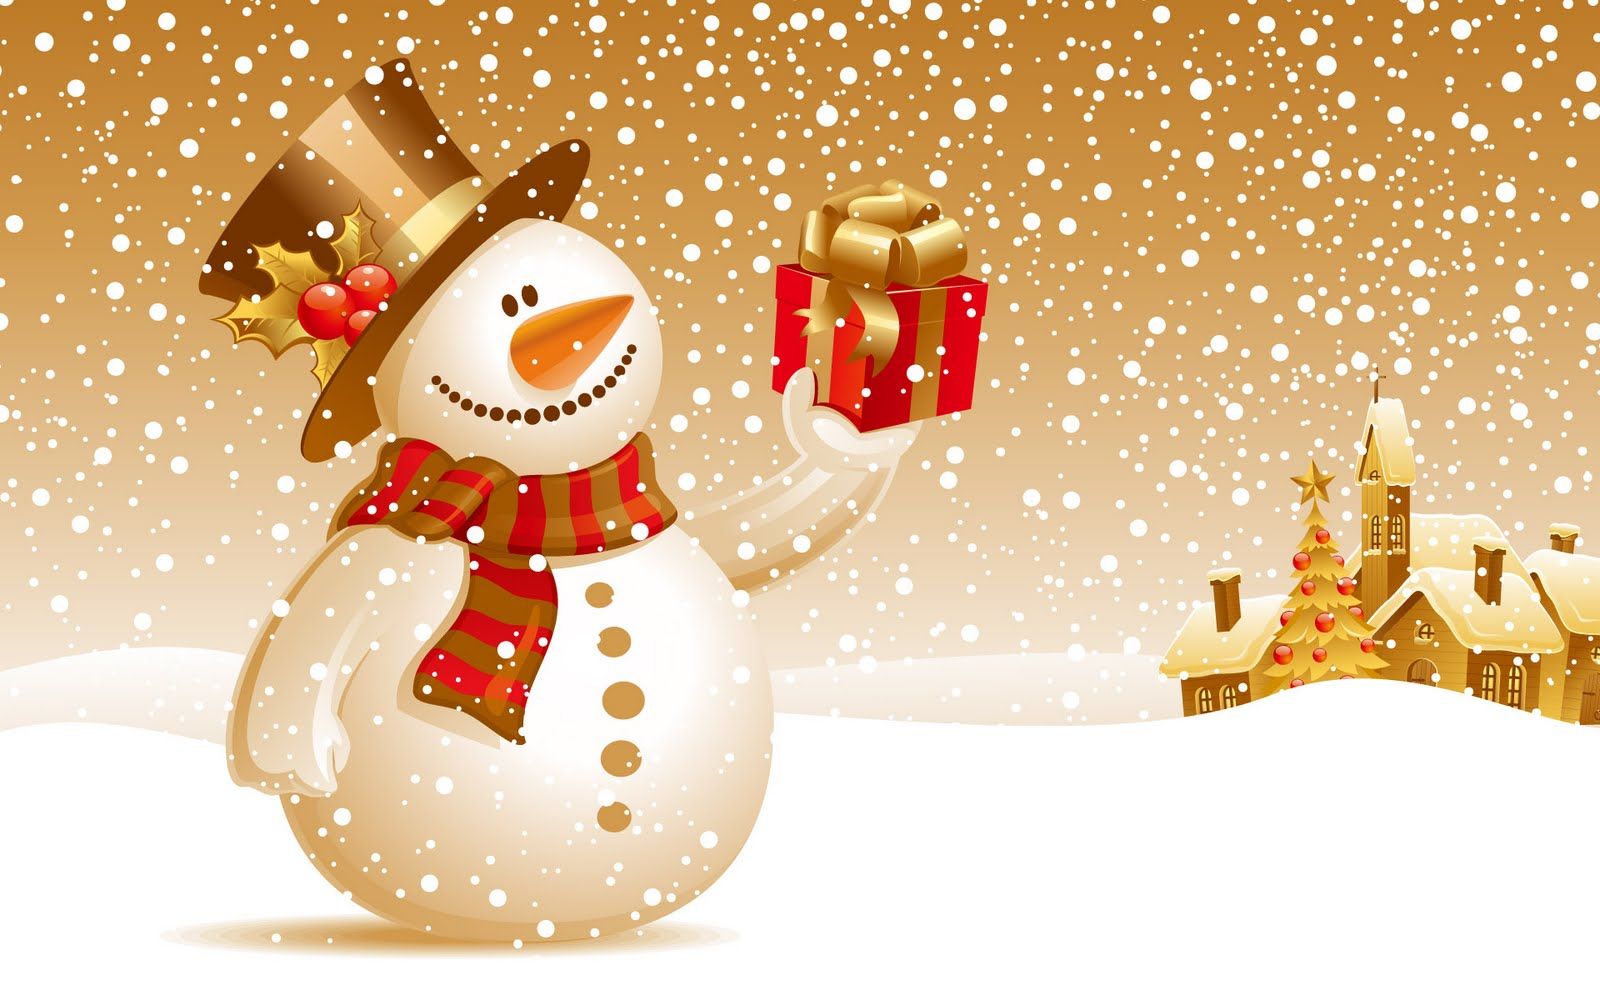 Merry Christmas Snowman Quality Image And Transparent PNG Free Clipart